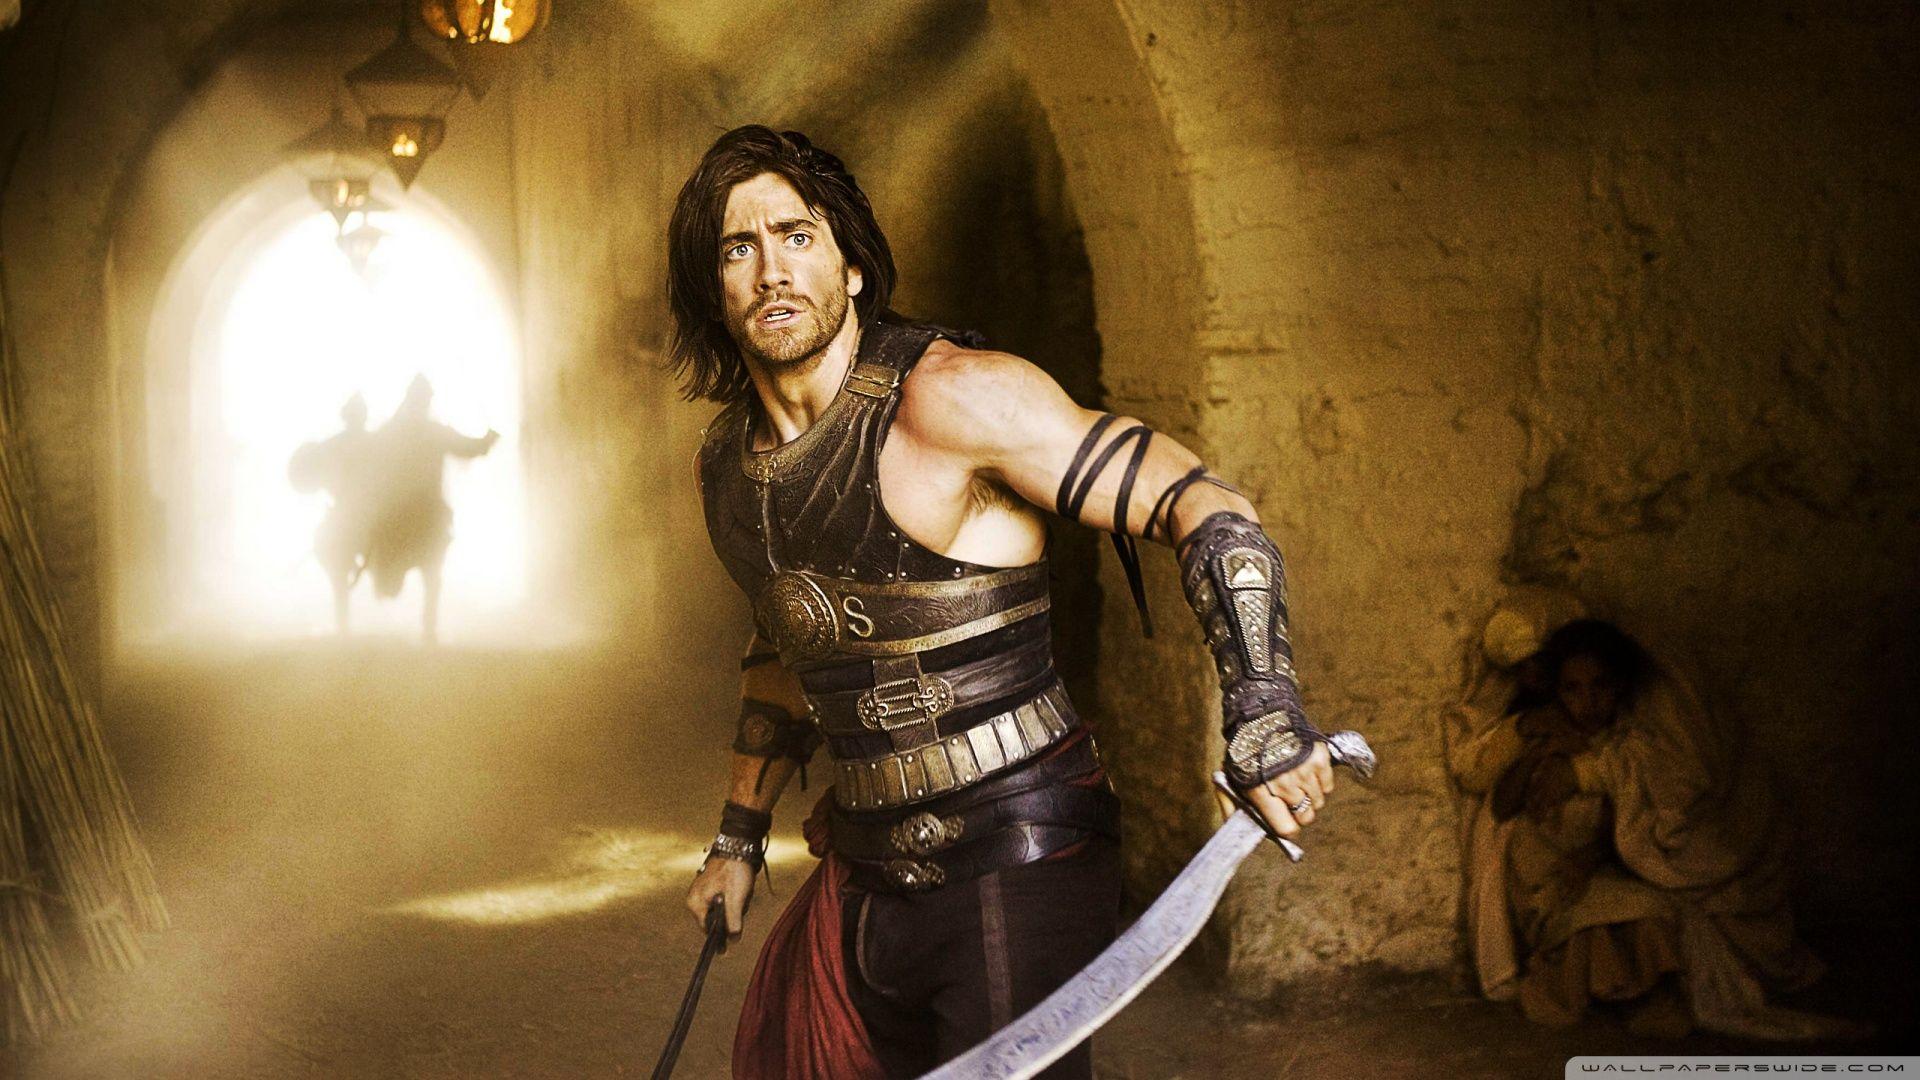 Prince Of Persia, The Sands Of Time HD desktop wallpaper